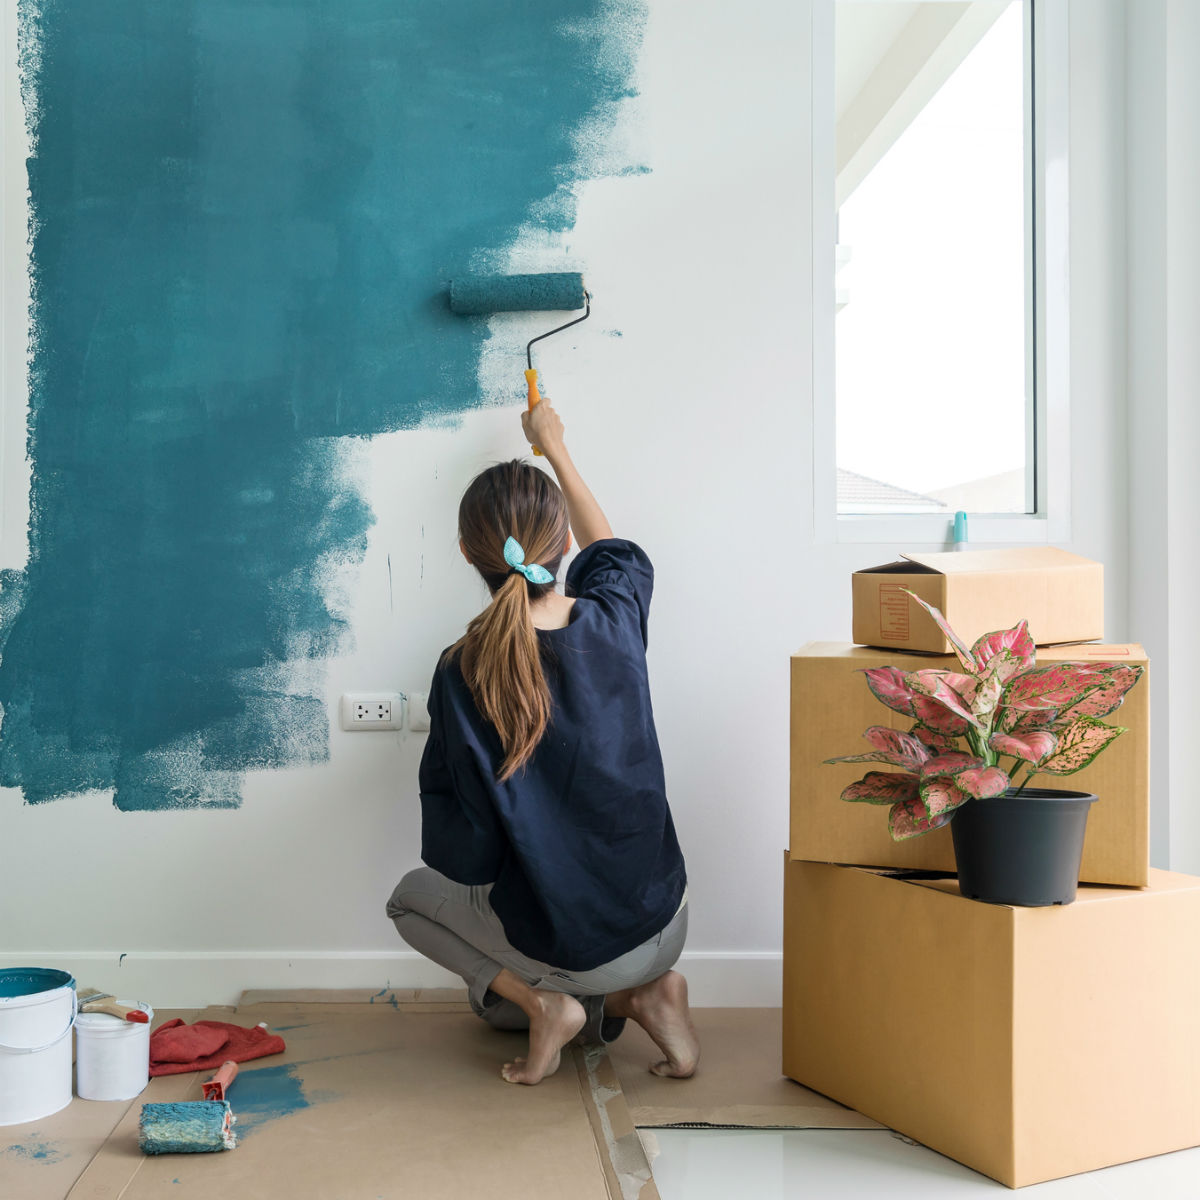 Why You'll Want an Air Filtration System When Painting a Room